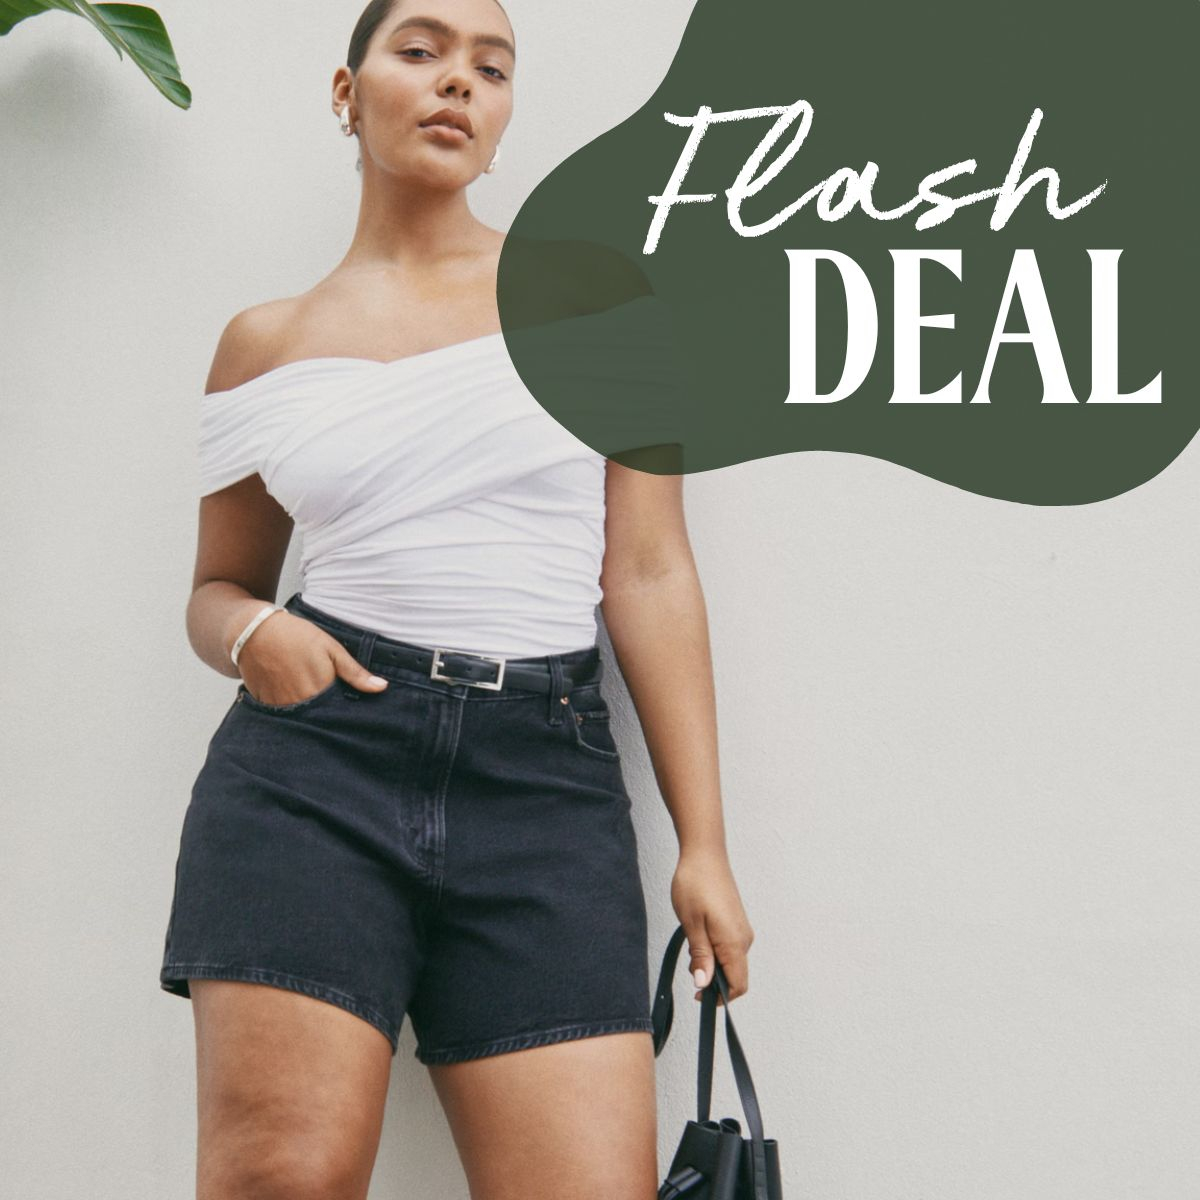 This A&F Shorts Sale Is Long on Savings — Deals Starting at $25